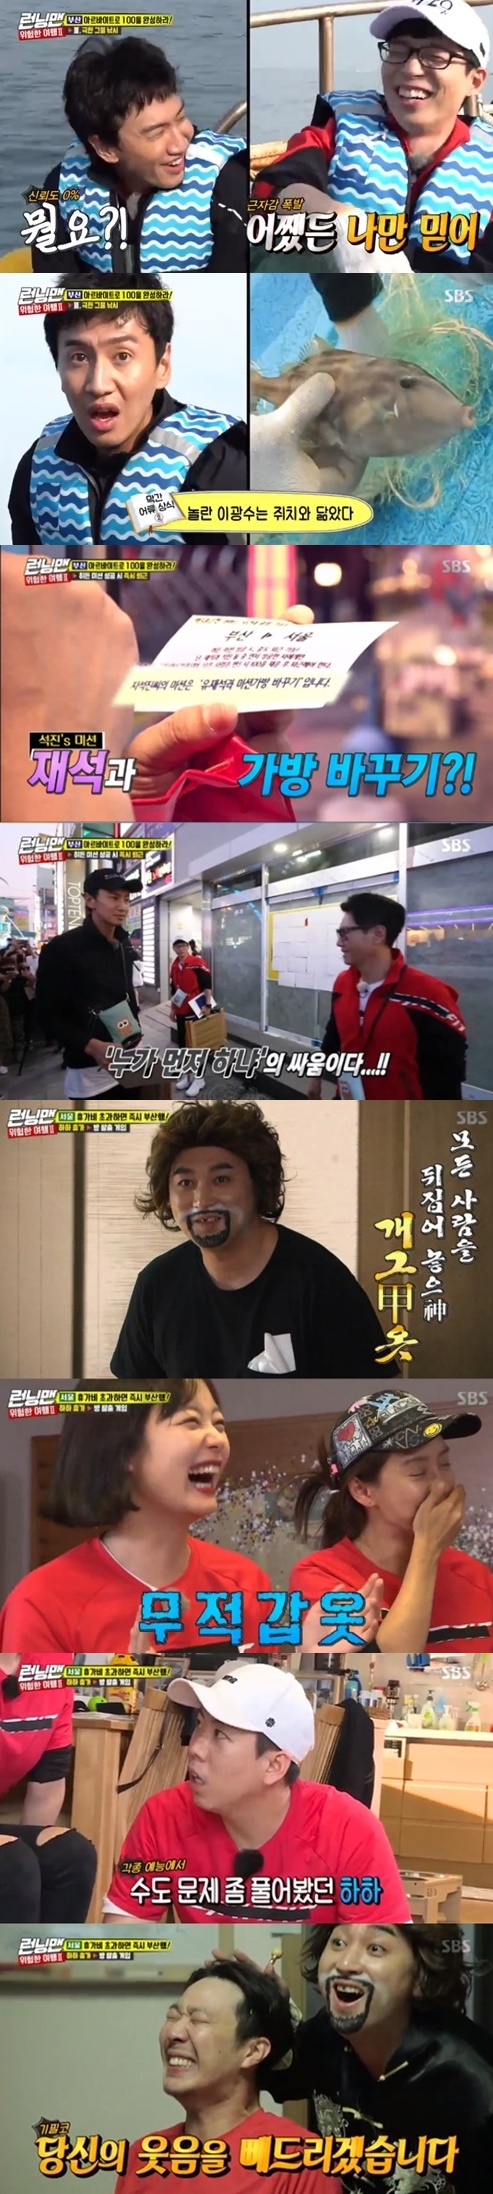 SBS Running Man Ji Suk-jin made the best one minute of audience rating.According to Nielsen Korea, a ratings agency, Running Man, which was broadcast on the 7th, ranked first in the same time zone with a target audience rating of 4.3% (based on households in the metropolitan area and ratings in the second part), which is 20-49 years old (hereinafter referred to as 2049), which is an important indicator of major advertising officials.The average audience rating was 4.5% in the first part and 6.6% in the second part, and the Per minute highest audience rating jumped to 8.2%.The broadcast was featured in the Dangerous Travel 2 feature last week, and the comedians Yoo Jae-Suk, Ji Suk-jin and Lee Kwang-soo were Top Model on the mission to match the number 100 from Busan to part-time job.The three went on to the second Alvaro The Net fishing, but the desired fish species did not get caught in The Net, and Yoo Jae-Suk laughed with his hand to the fish.Eventually, the three people tried to caricature for the third Alba without filling 100.In this process, Yoo Jae-Suk and Ji Suk-jin each went on the Hidden Mission Top Model called Ji Suk-jin Sock Remove, and Ji Suk-jin went on the Hidden Mission Top Model called Yoo Jae-Suk Changing Bag, and Yoo Jae-Suk, who built a coalition front with Lee Kwang-soo, He beat Suk-jin and won a ticket to Seoul.Lee Kwang-soo also liquidated his forehead debt, but Ji Suk-jin remained alone in Busan, filling the number 100 through a hodok sale.The scene soared to a maximum of 8.2% in Per minute, taking the best minute.Other members headed to Yang Se-chans home for Hahas room escape game.They decided to hang each mission at the Yang Se-chan house and go to the Top Model one by one; the best was the surprise appearance of comedian Empire.Emperor laughed with a gag armor that overwhelmed everyone like a 2019 Rising Comedian, and Haha eventually failed to laugh in.In addition, Haha and Yang Se-chan emit unexpected foolish beauty chemistry through quiz showdown, while Kim Jong-guk enjoyed vacation by surfing the toilet.